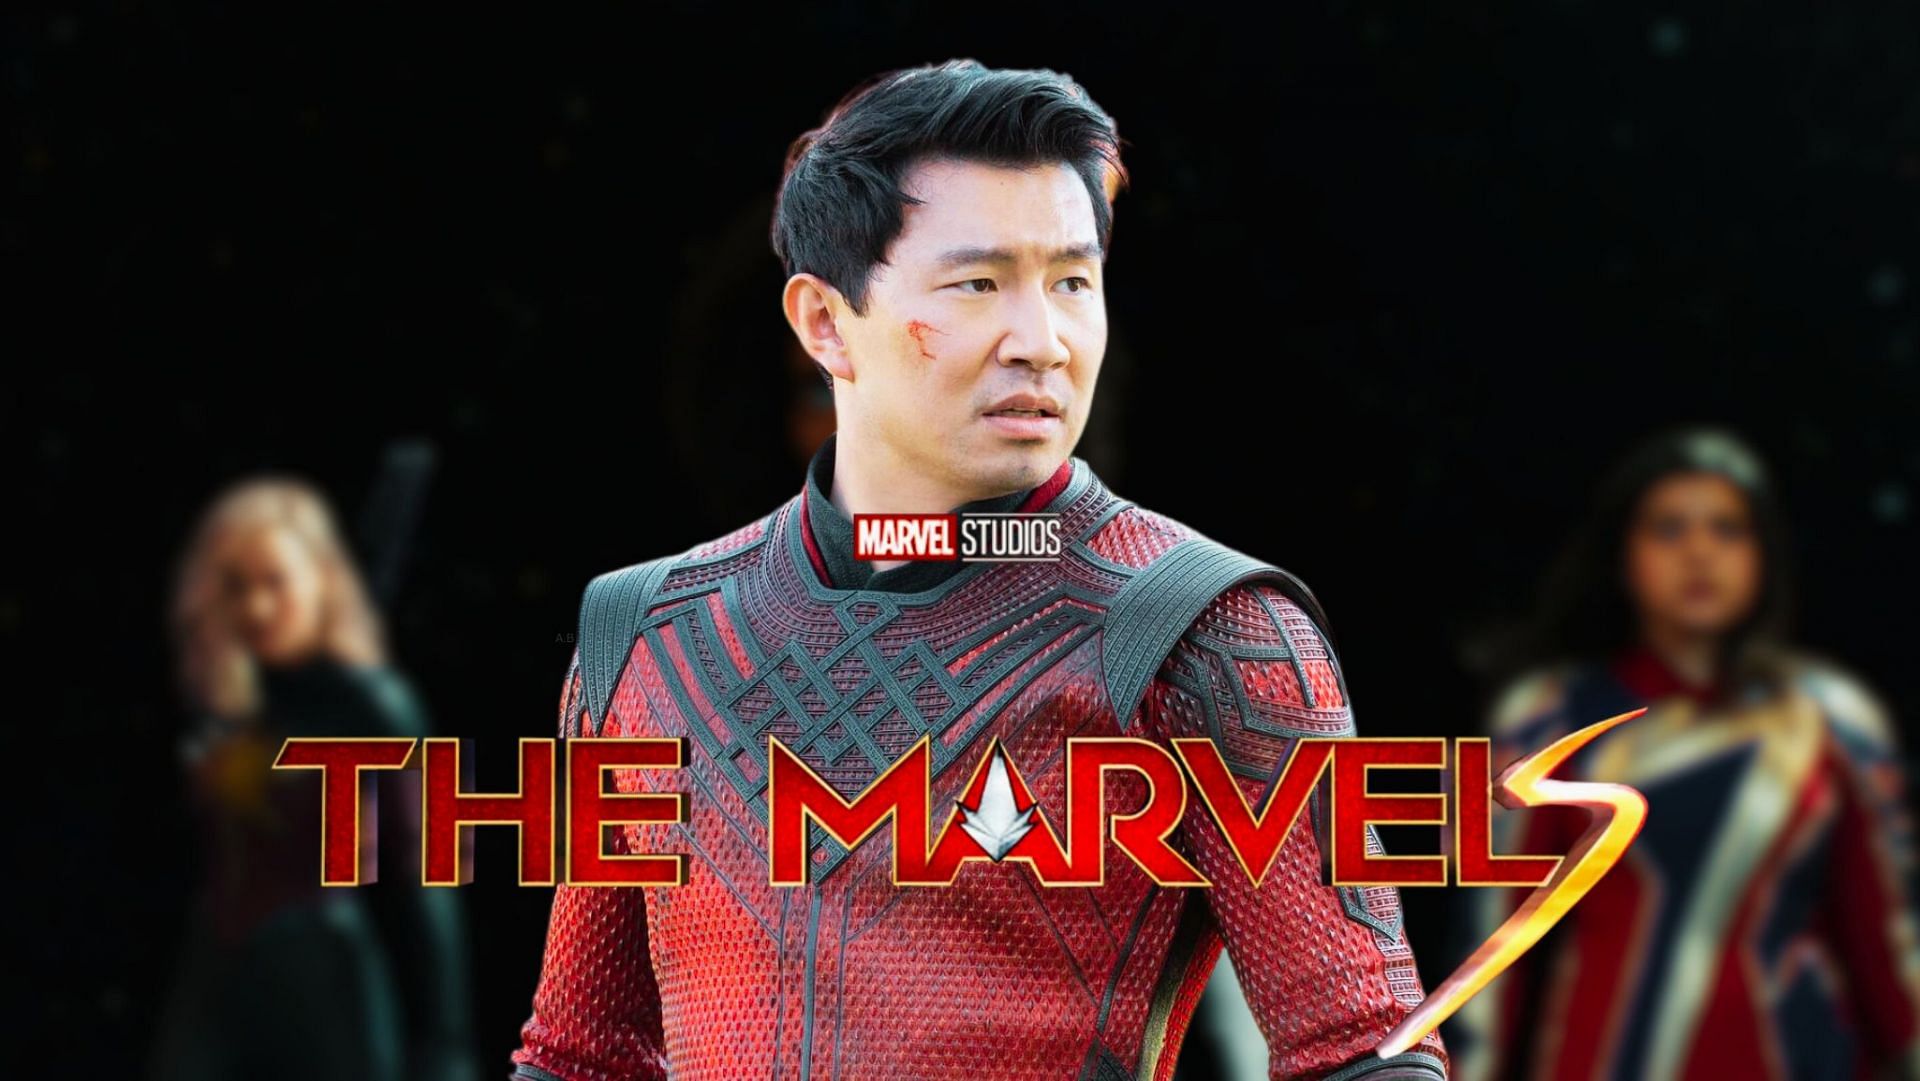 The Marvels Trailer Drops Hints: Is Shang-Chi Joining the Superhero Spectacle? (Image via Sportskeeda)